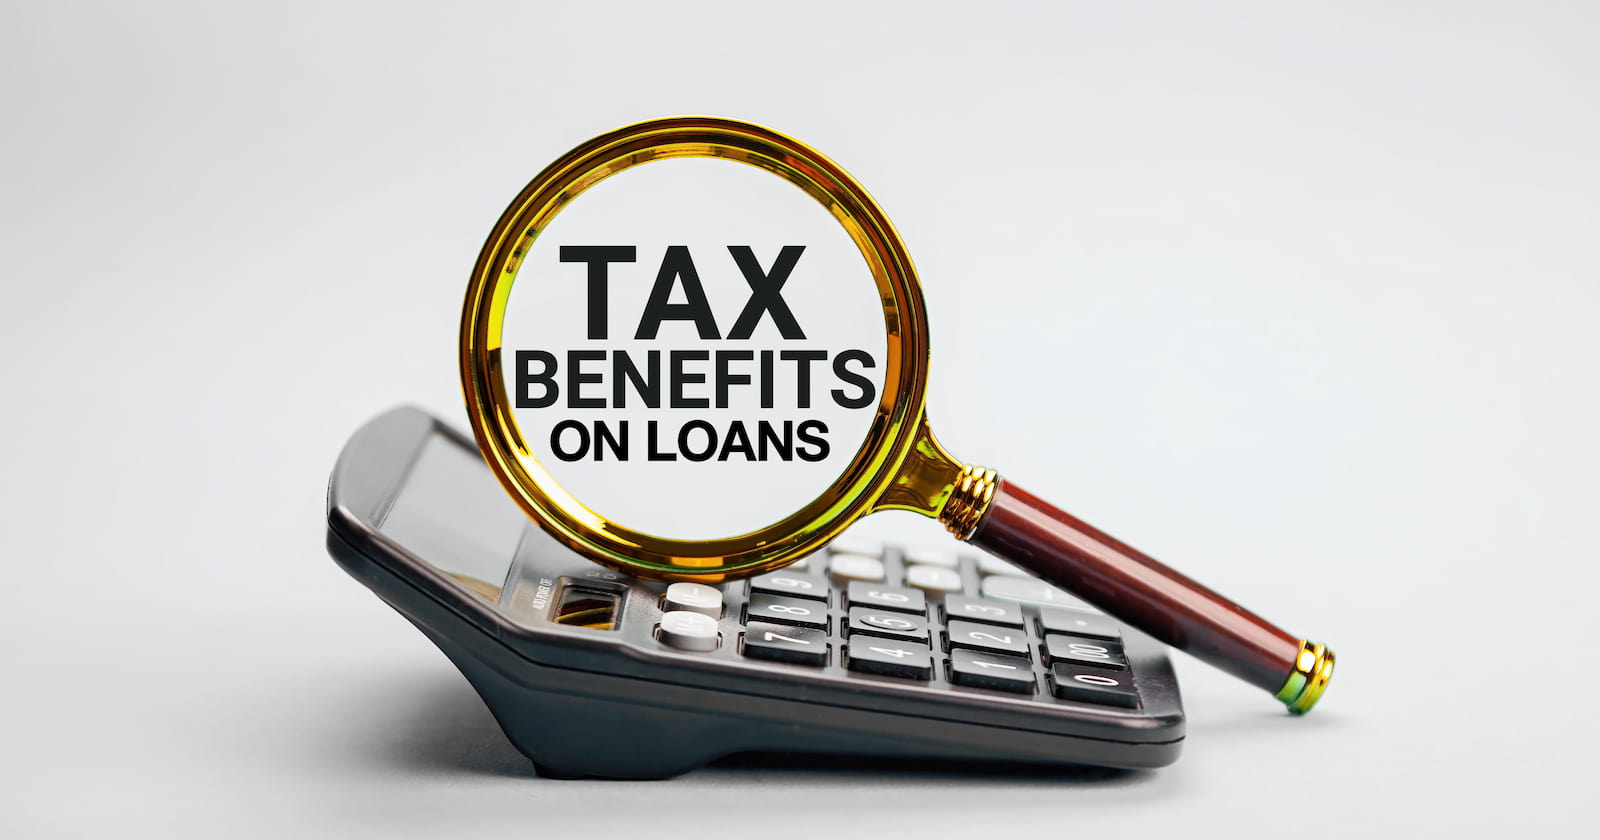 4 Different Types Of Loans That Have Tax Benefits 